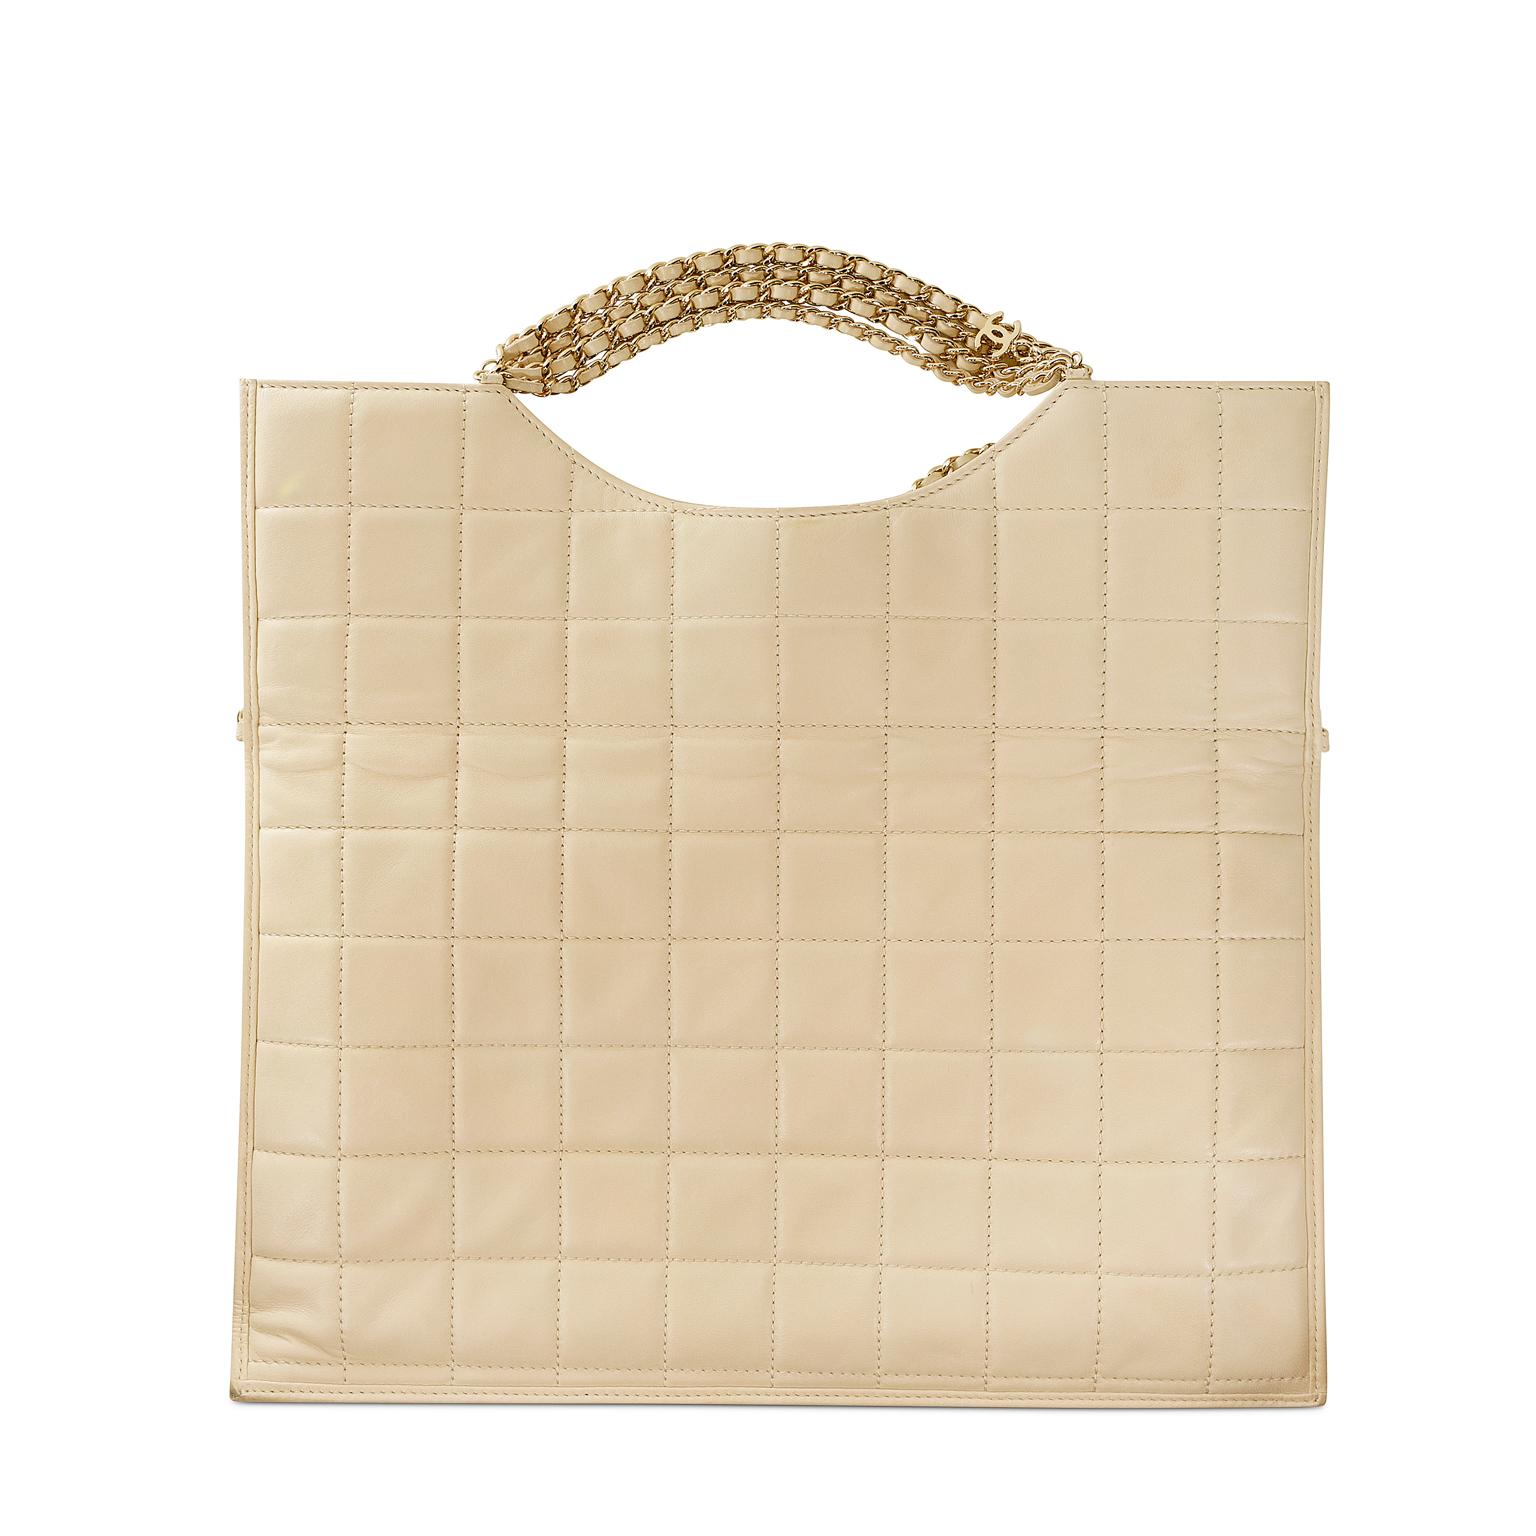 Chanel Beige Leather Four Chain Clutch- Excellent Plus Condition
An optional shoulder strap adds a convertible dimension making it both stylish and practical.  
Beige leather slim clutch is quilted in square pattern.  Fold down top has multiple gold